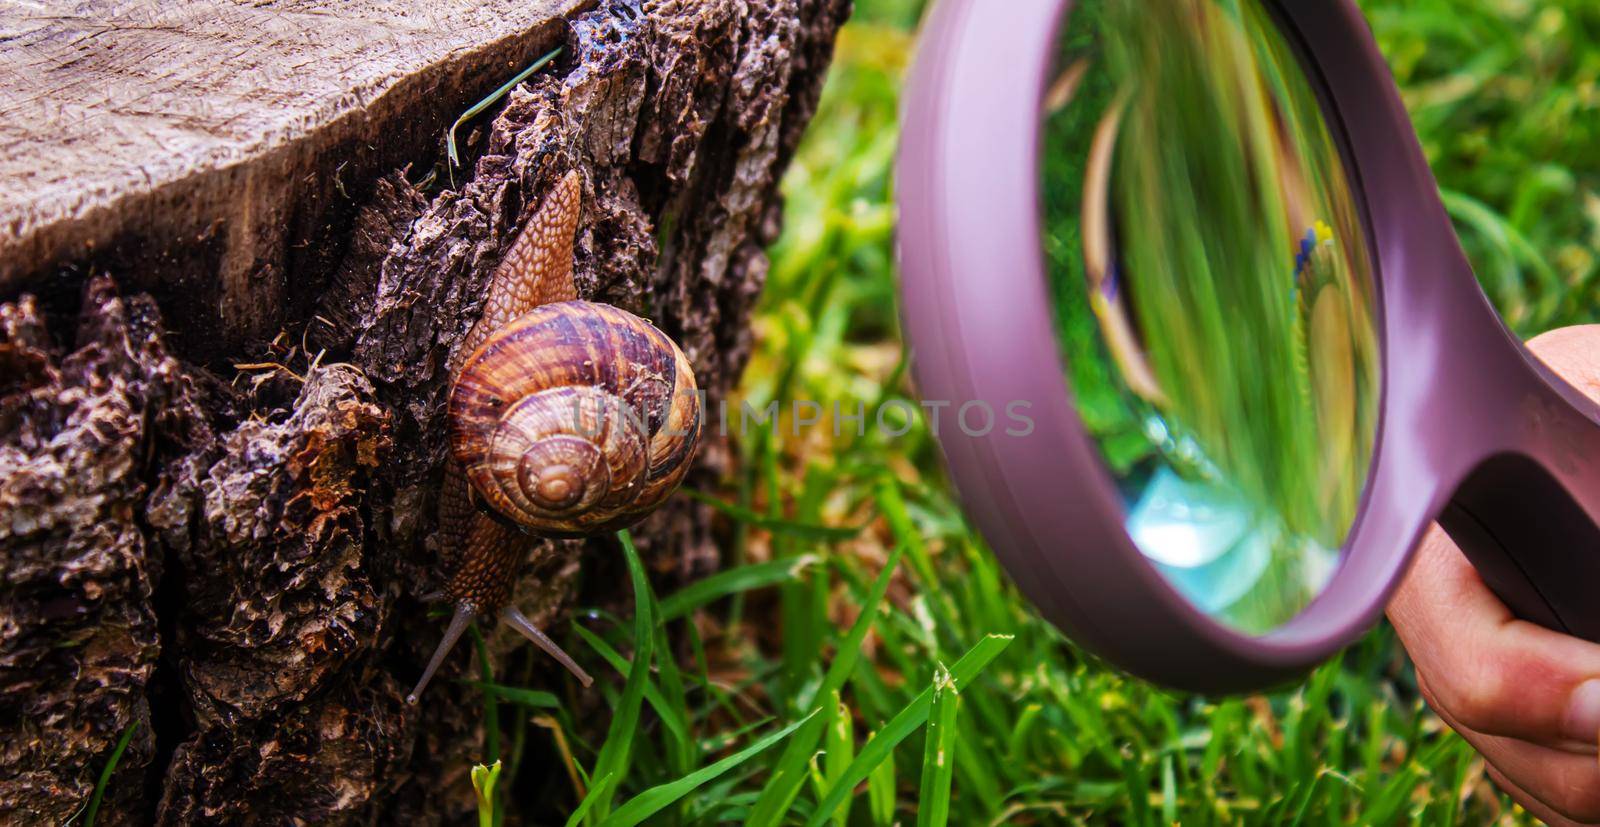 Snails in nature on a tree. Selective focus. by mila1784